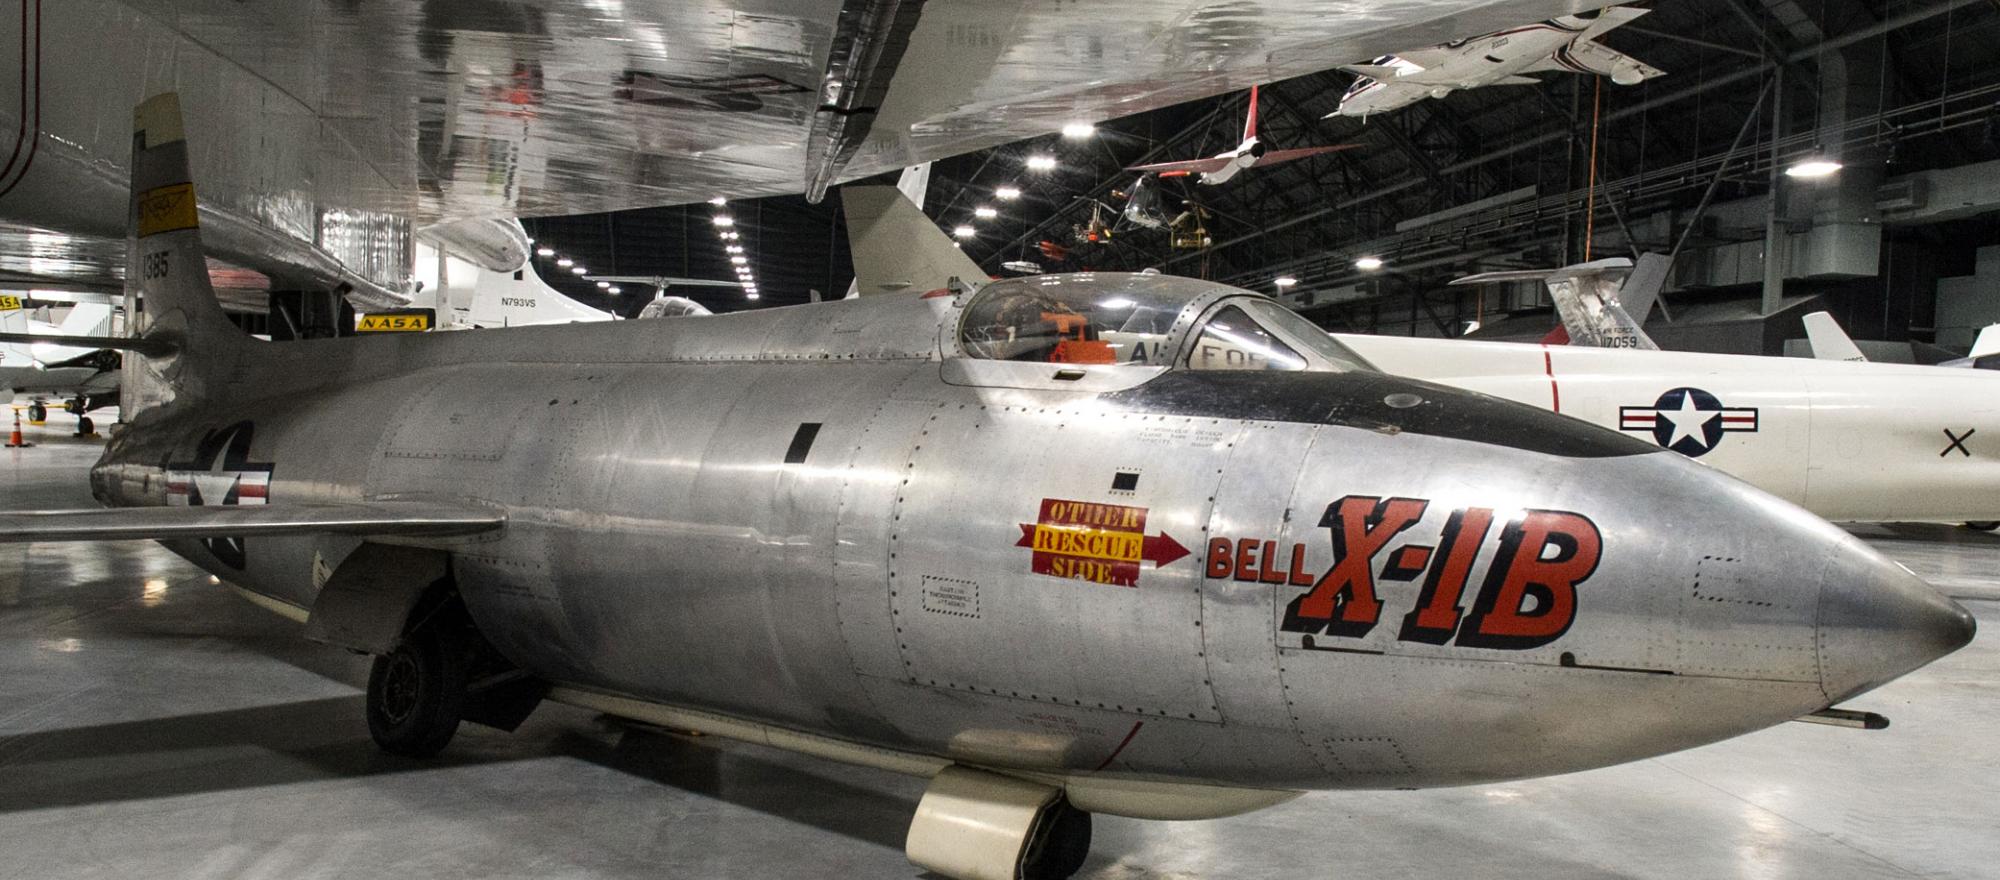 A new building at the National Museum of the U.S. Air Force houses more than 70 aircraft, missiles, and space vehicles, including this Bell X-1B.